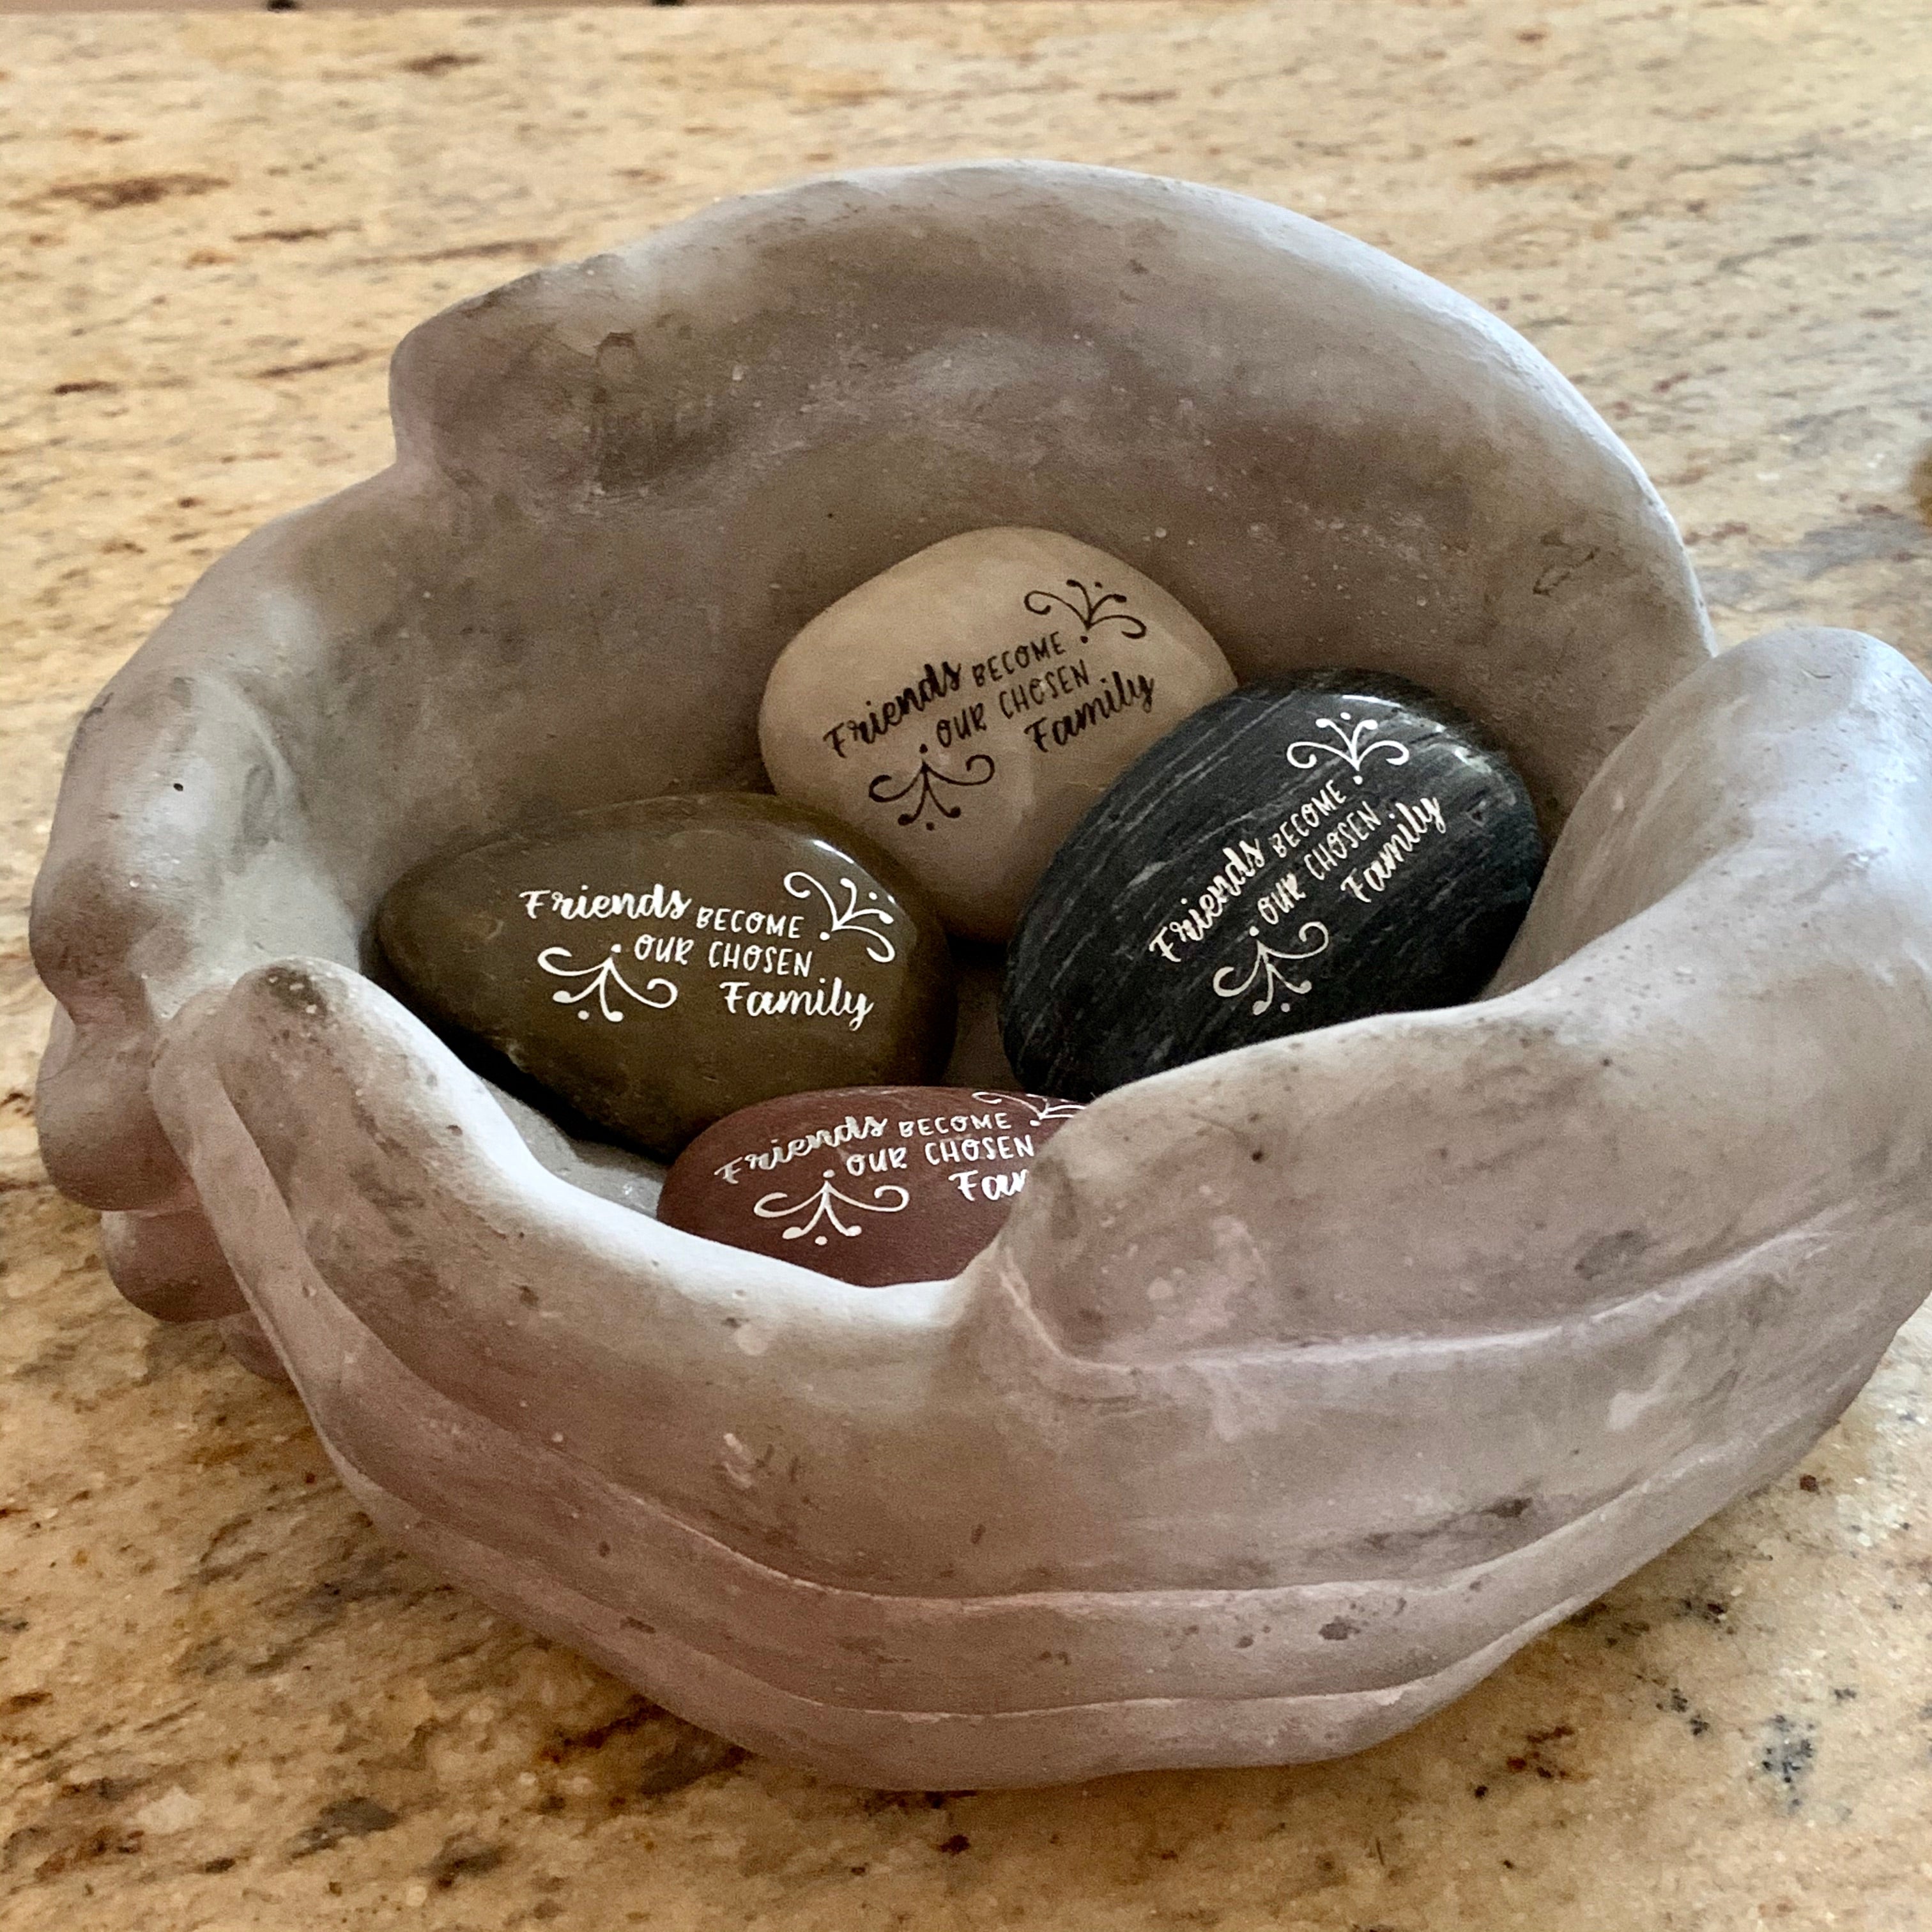 Friends Become Our Chosen Family ~ Engraved Inspirational Rock